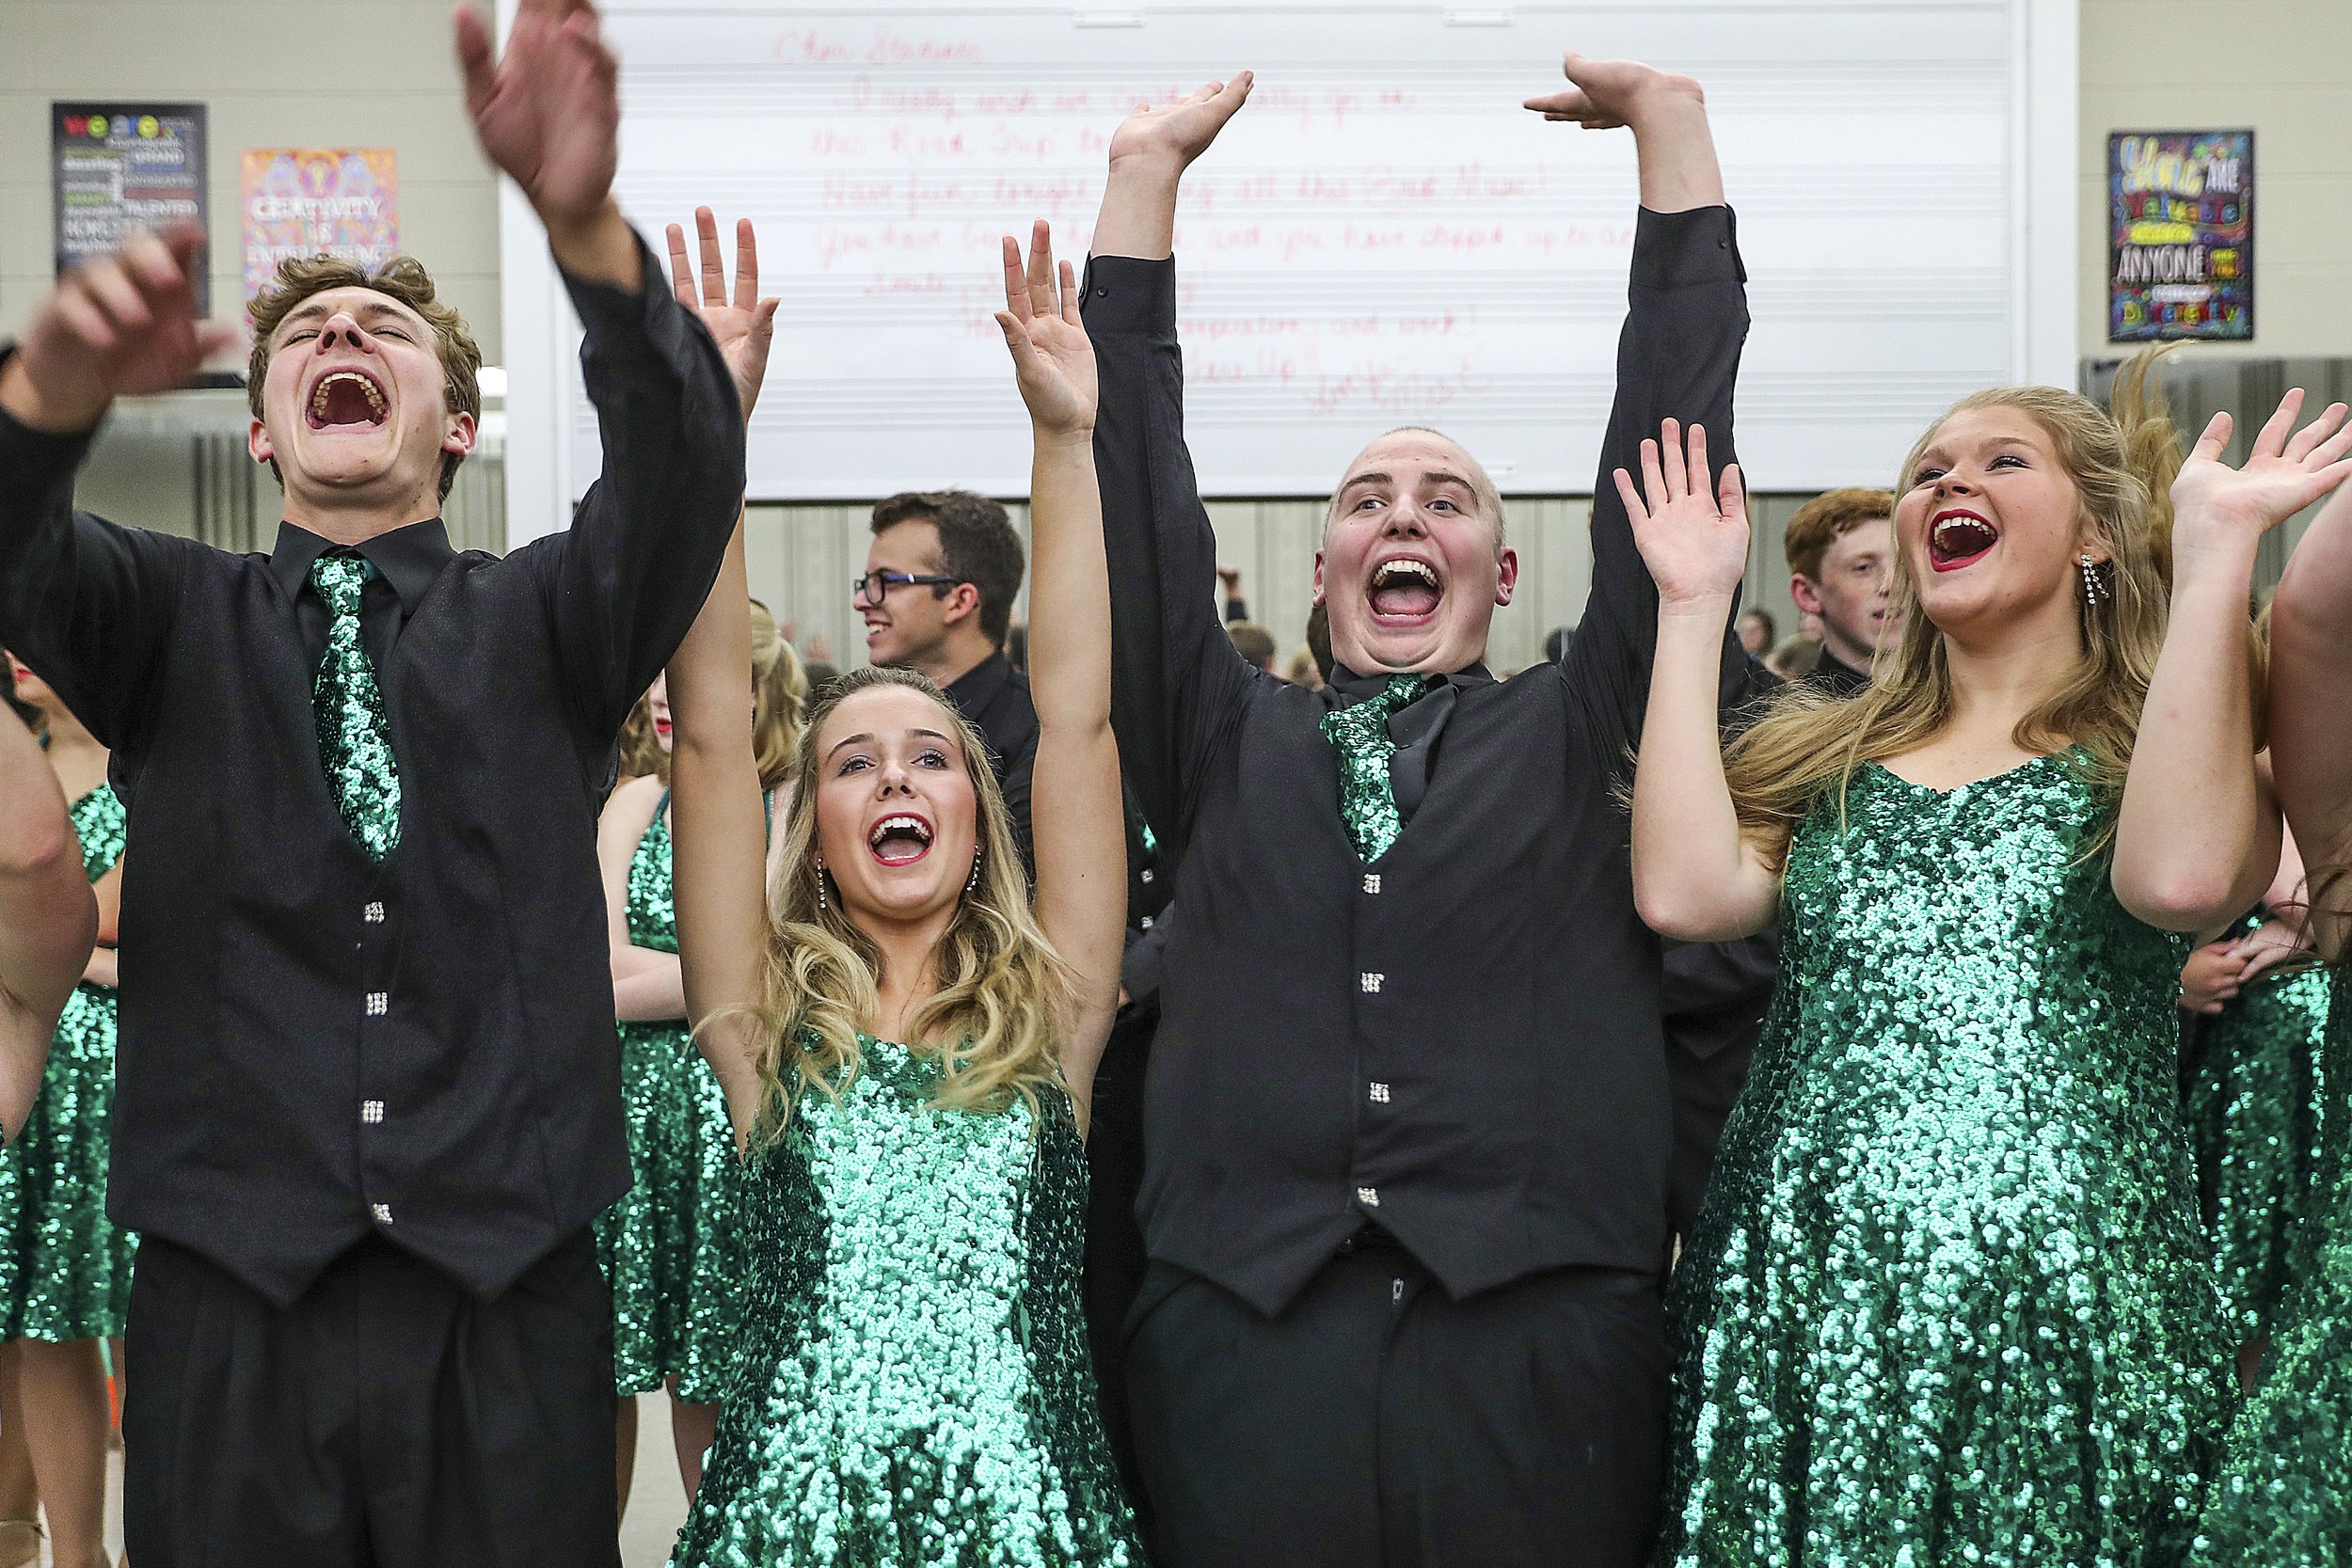  Second from right, Austin Hewitt and other senior students throw their hands in the air after circling for a pep chant and prayer before Eastern High School's fall show choir concert in Greentown, Ind., Wednesday, Sept. 26, 2018. In June 2017, Hewit